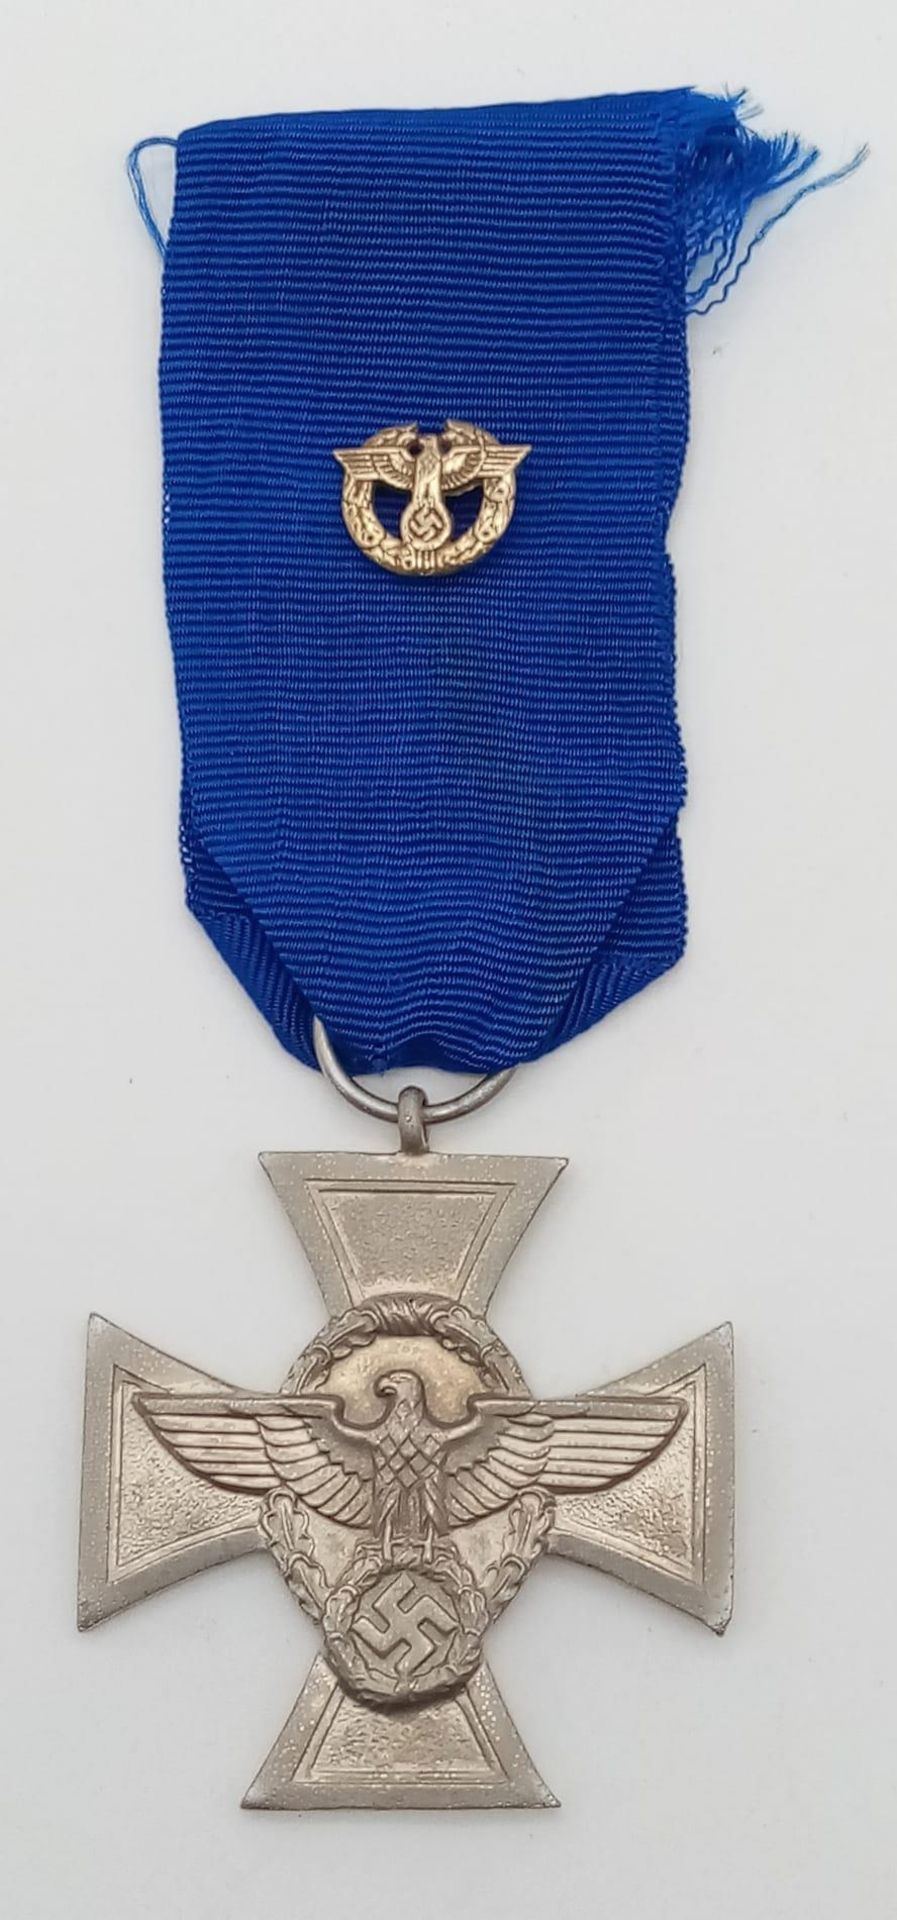 3rd Reich 18 Year Long Service Medal with stick pin of the Customs and Border Control.